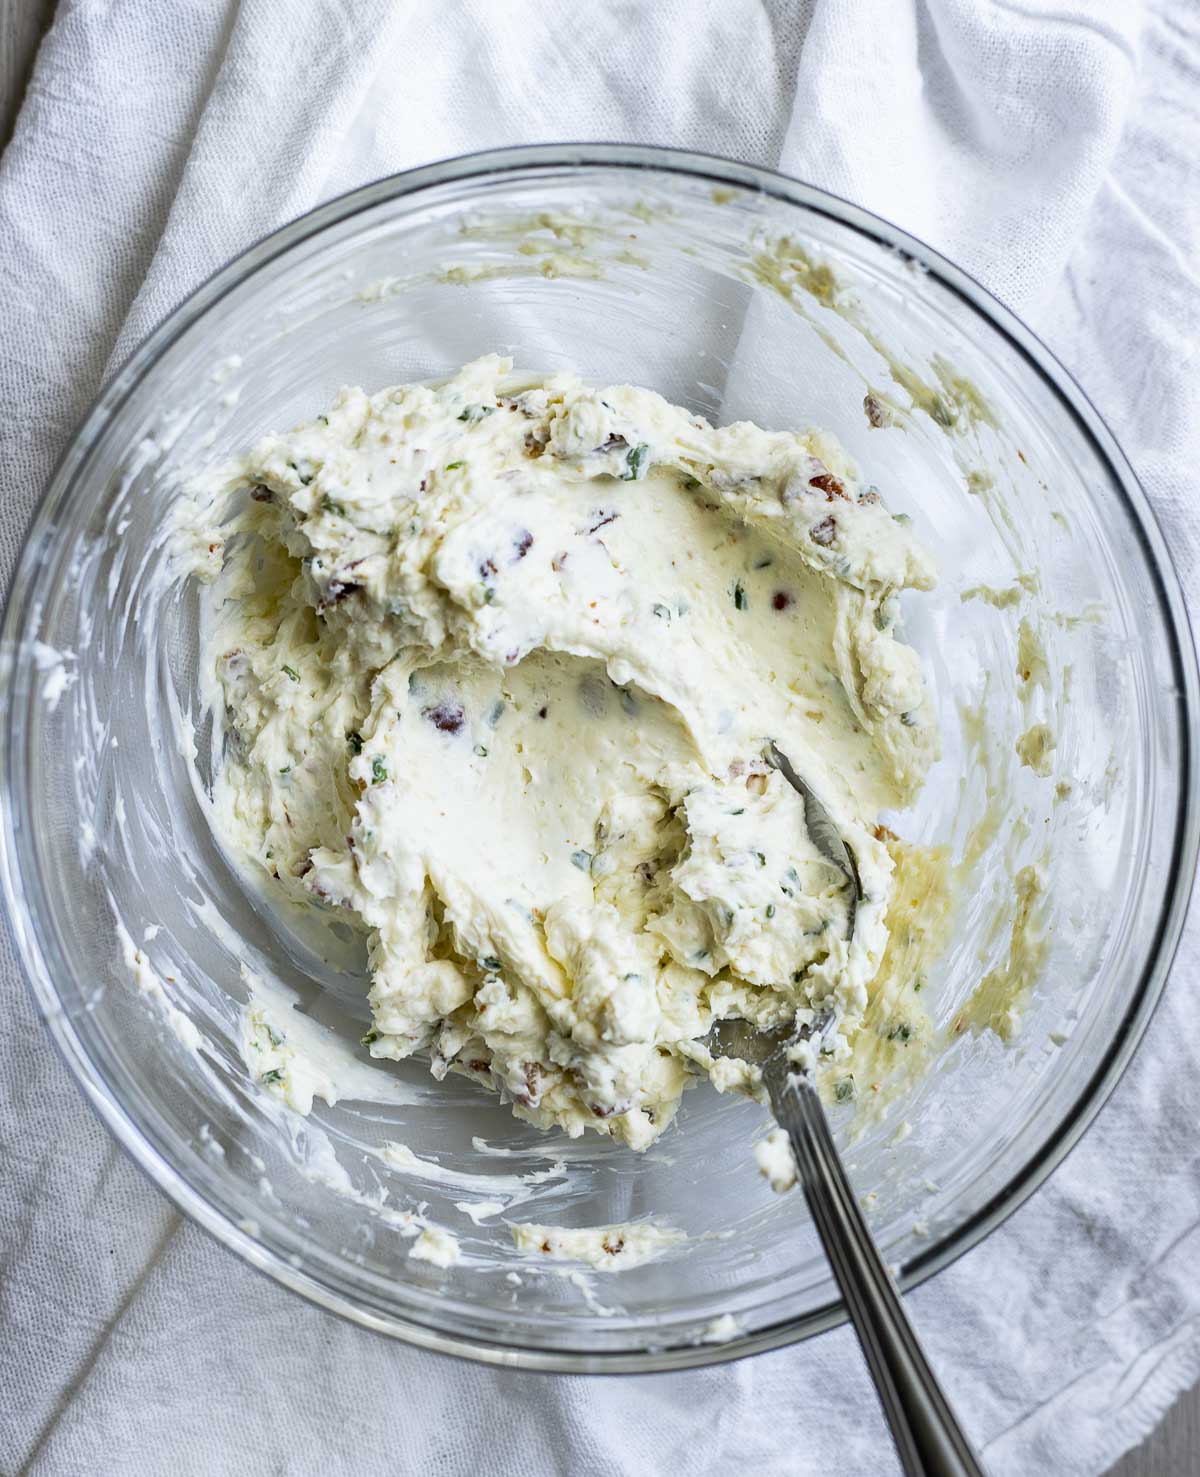 Cream cheese filling mixed together in a glass bowl with a spoon.